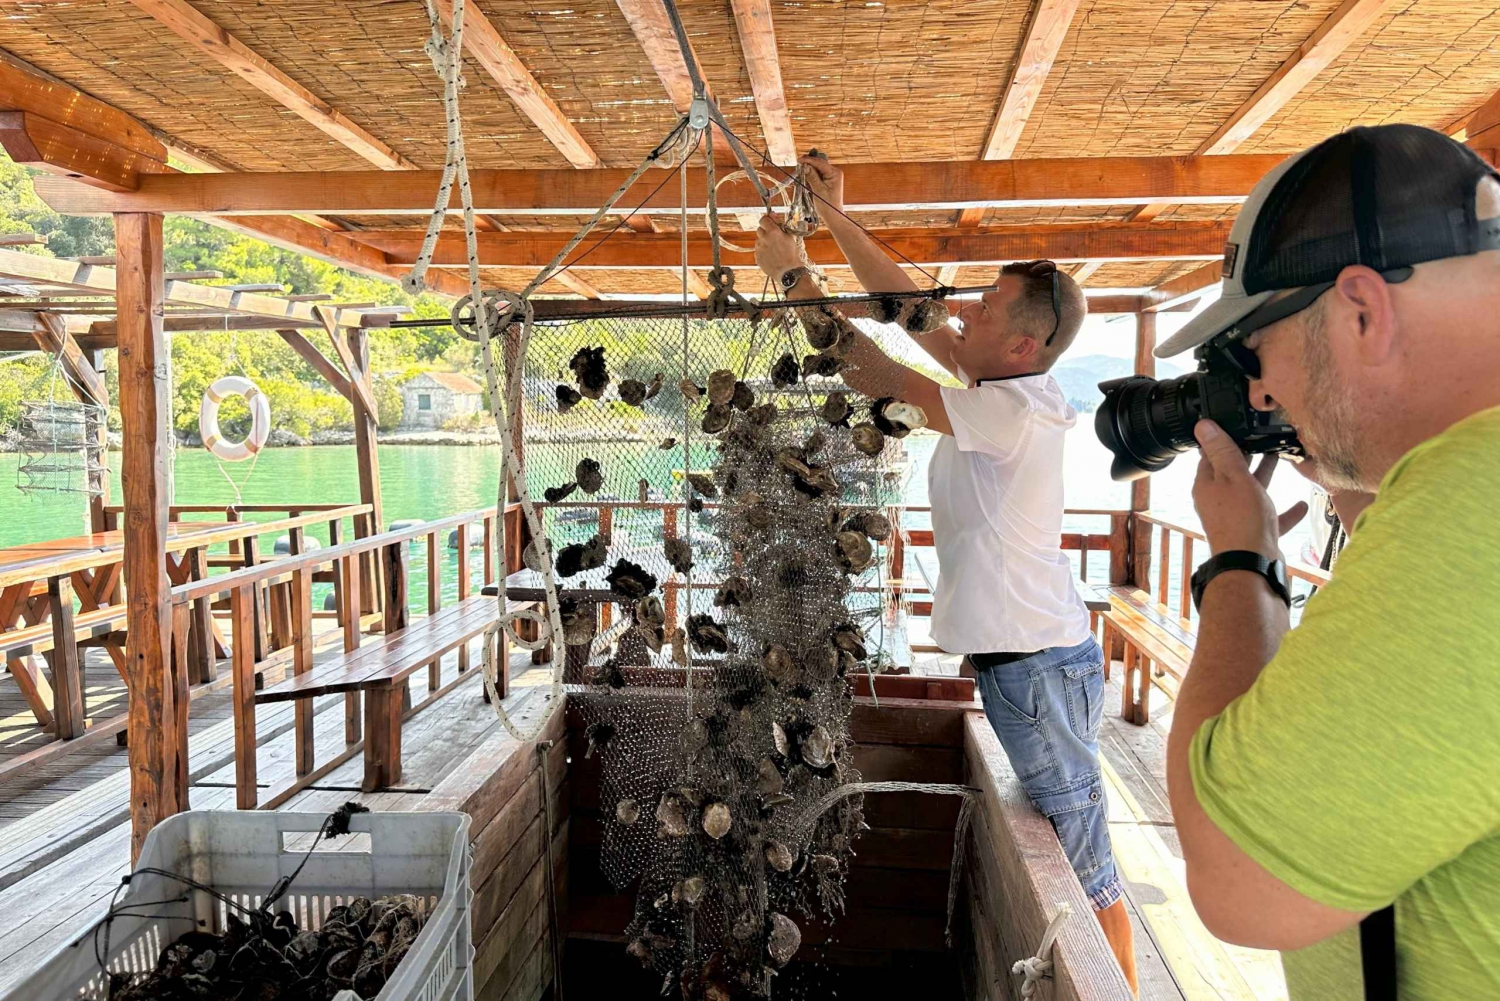 Oyster farm experience-private day trip from Dubrovnik